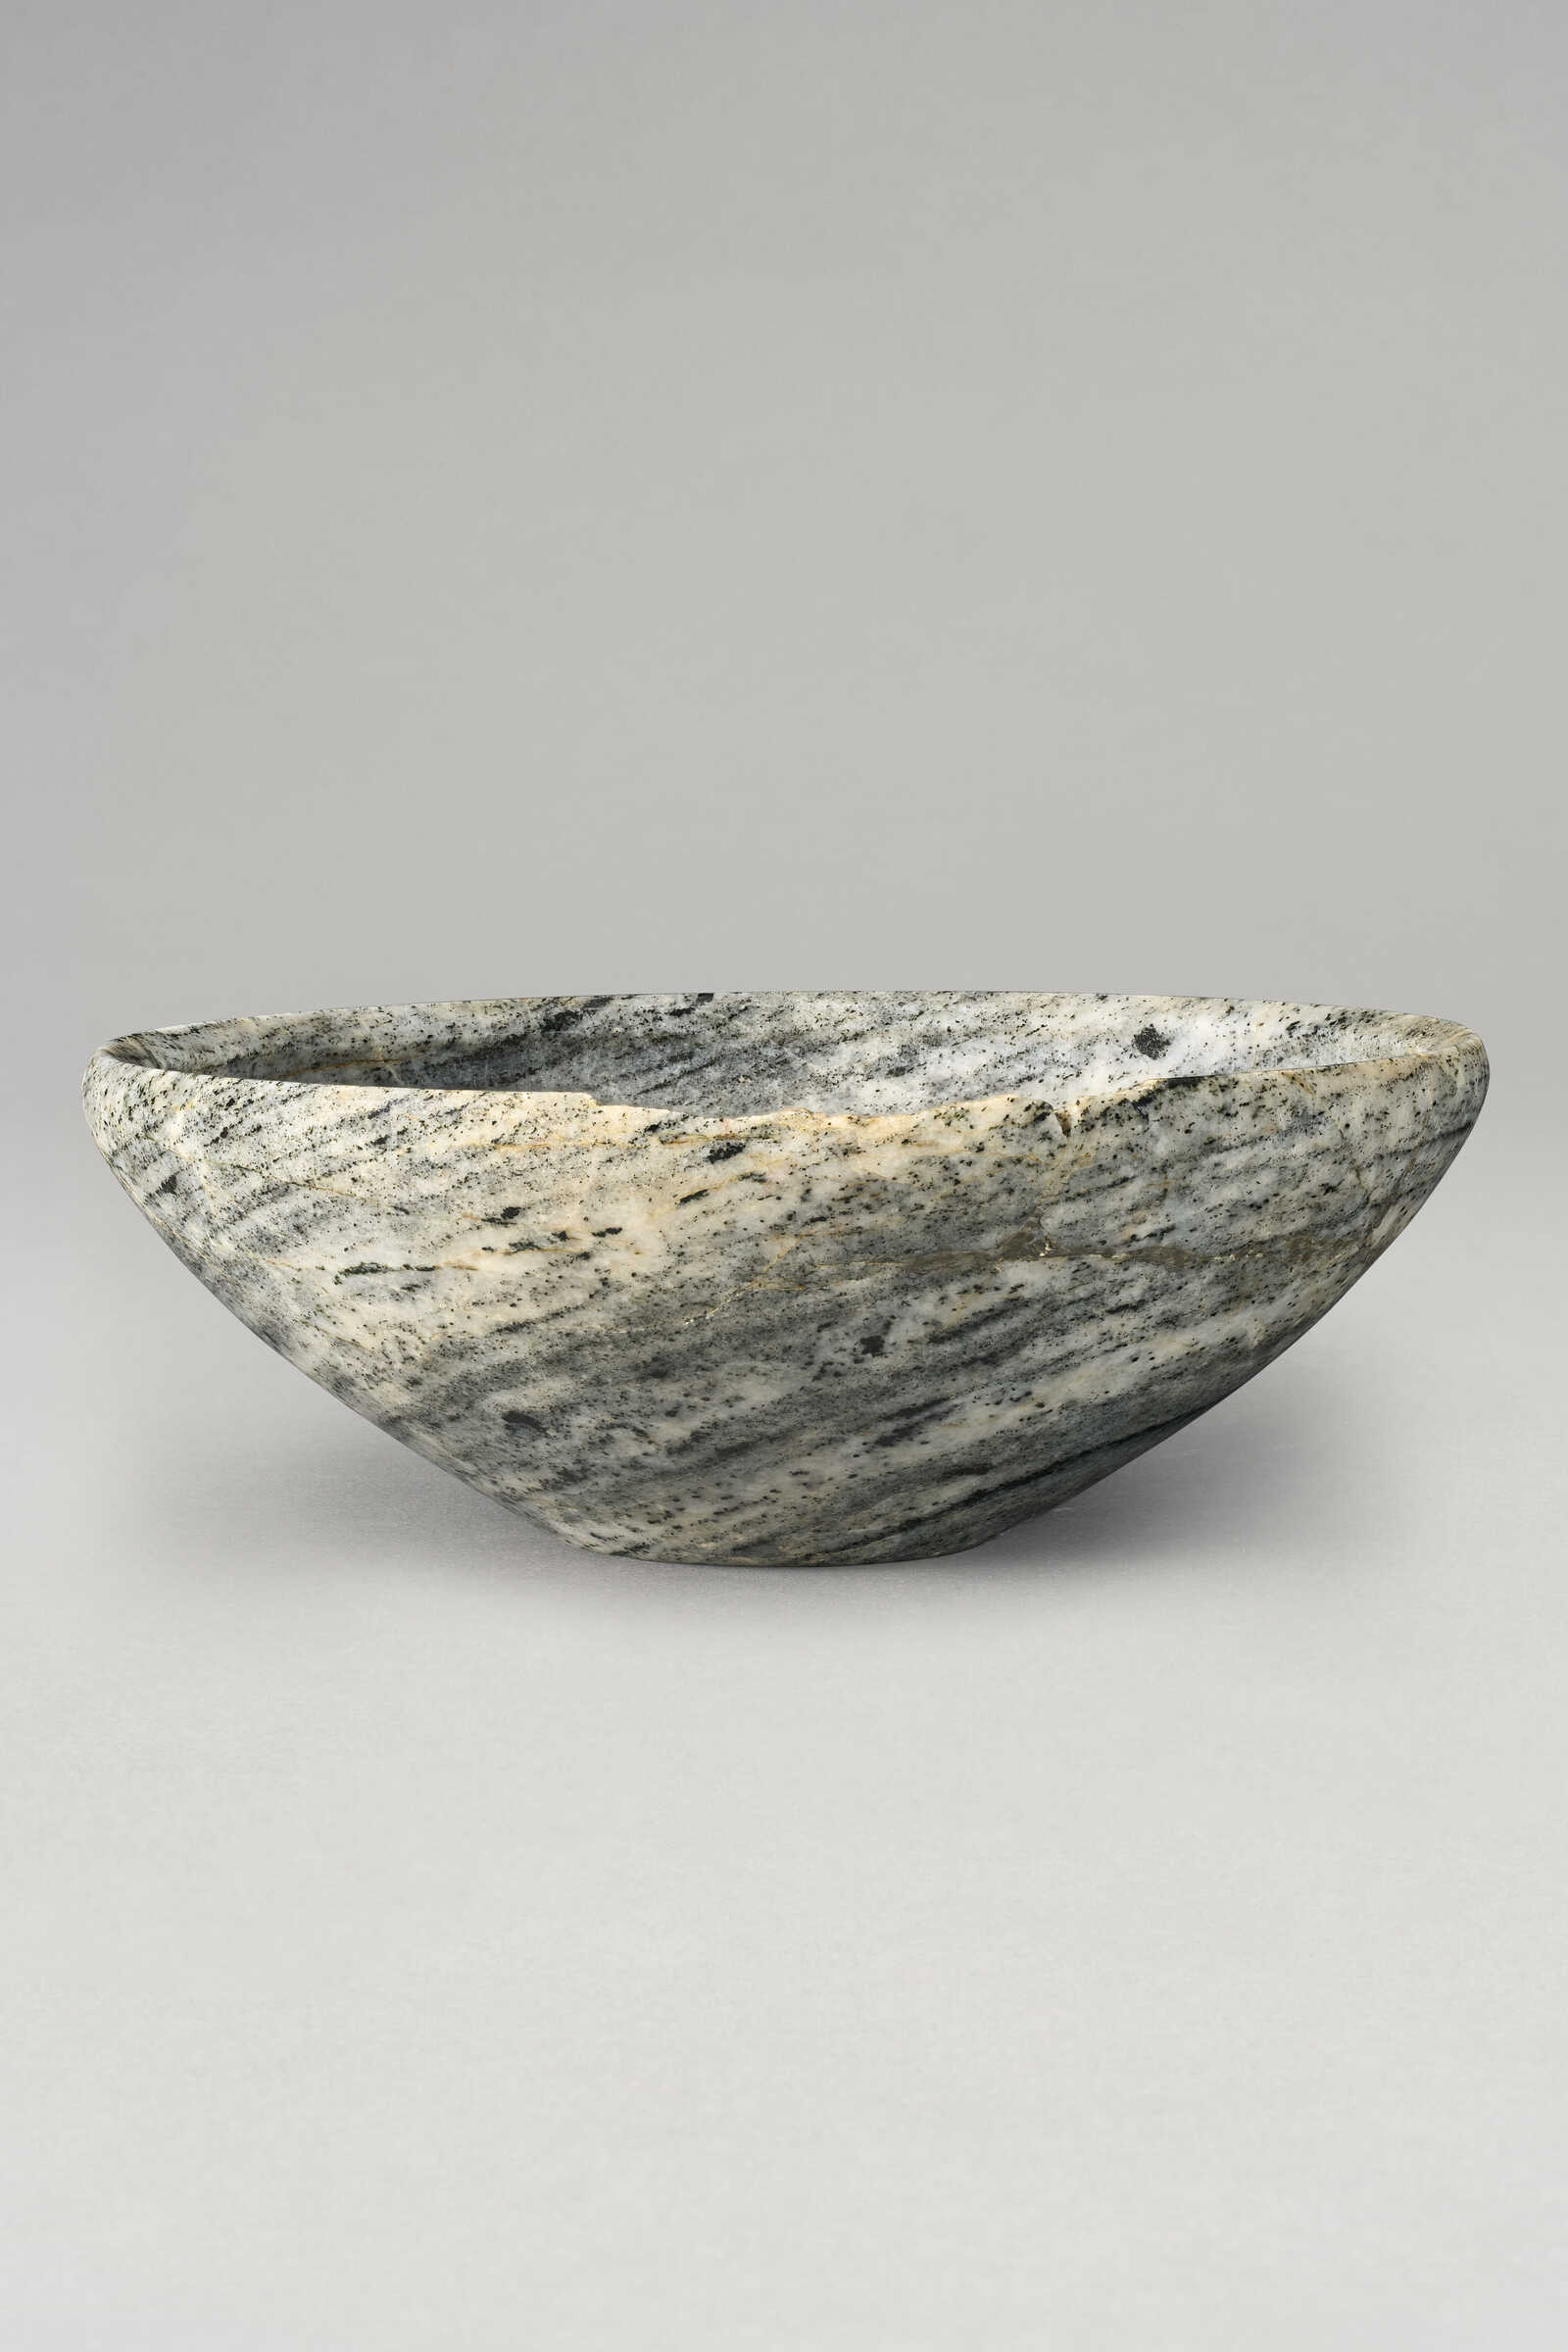 AN EGYPTIAN ANORTHOSITE GNEISS BOWL